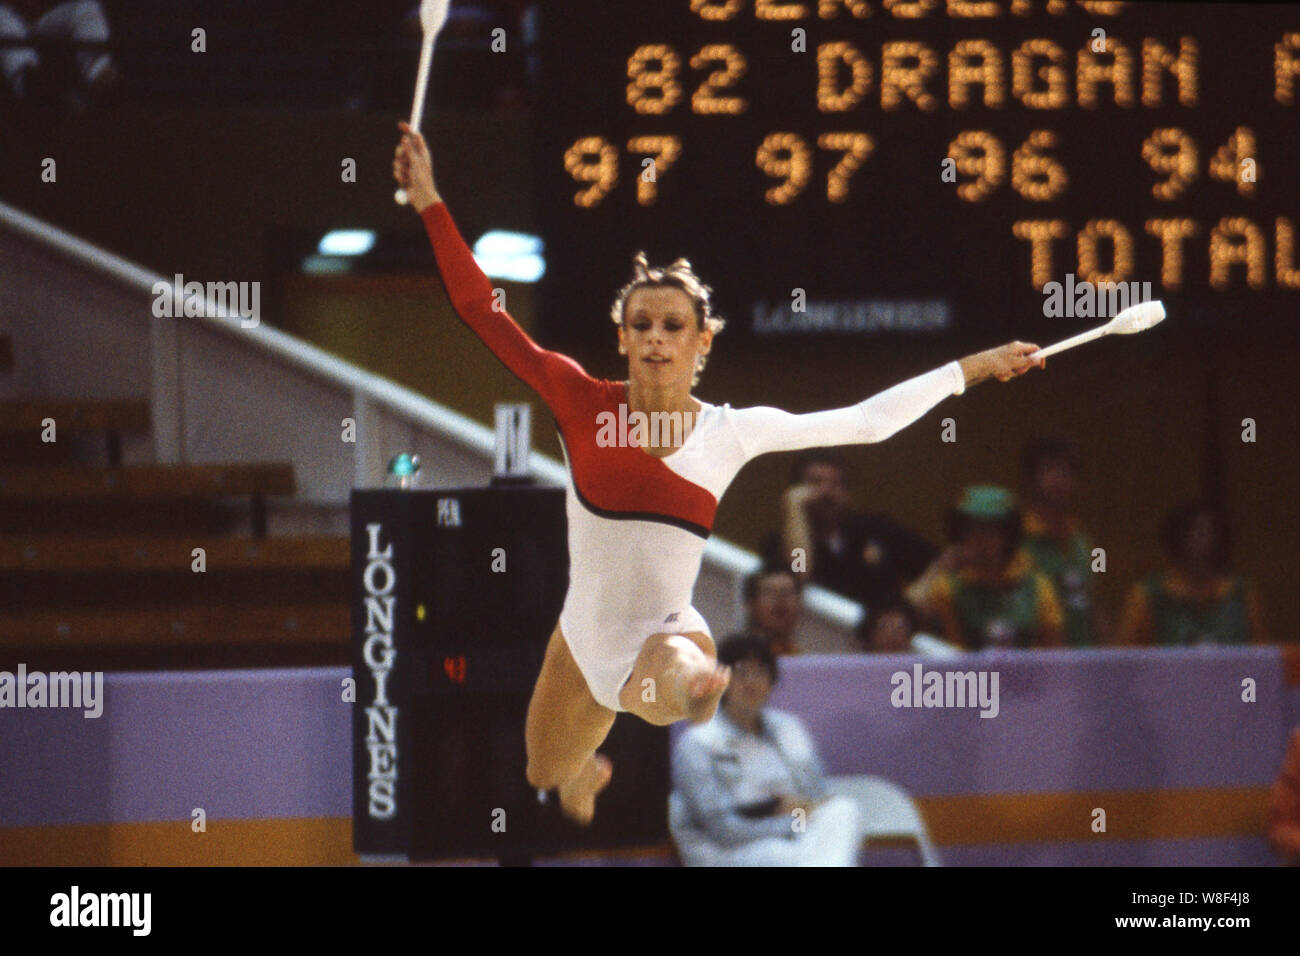 Regina WEBER, Germany, GER, Germany, Rhythmic Gymnastics, Action with the clubs, 3rd place, winner of the bronze medal, Games of the XXIII. Olympics Summer Games 1984 in Los Angeles USA from 28.07. until 12.08.1984. Regina Weber-Sane is the mother of footballer Leroy Sane, Â | usage worldwide Stock Photo